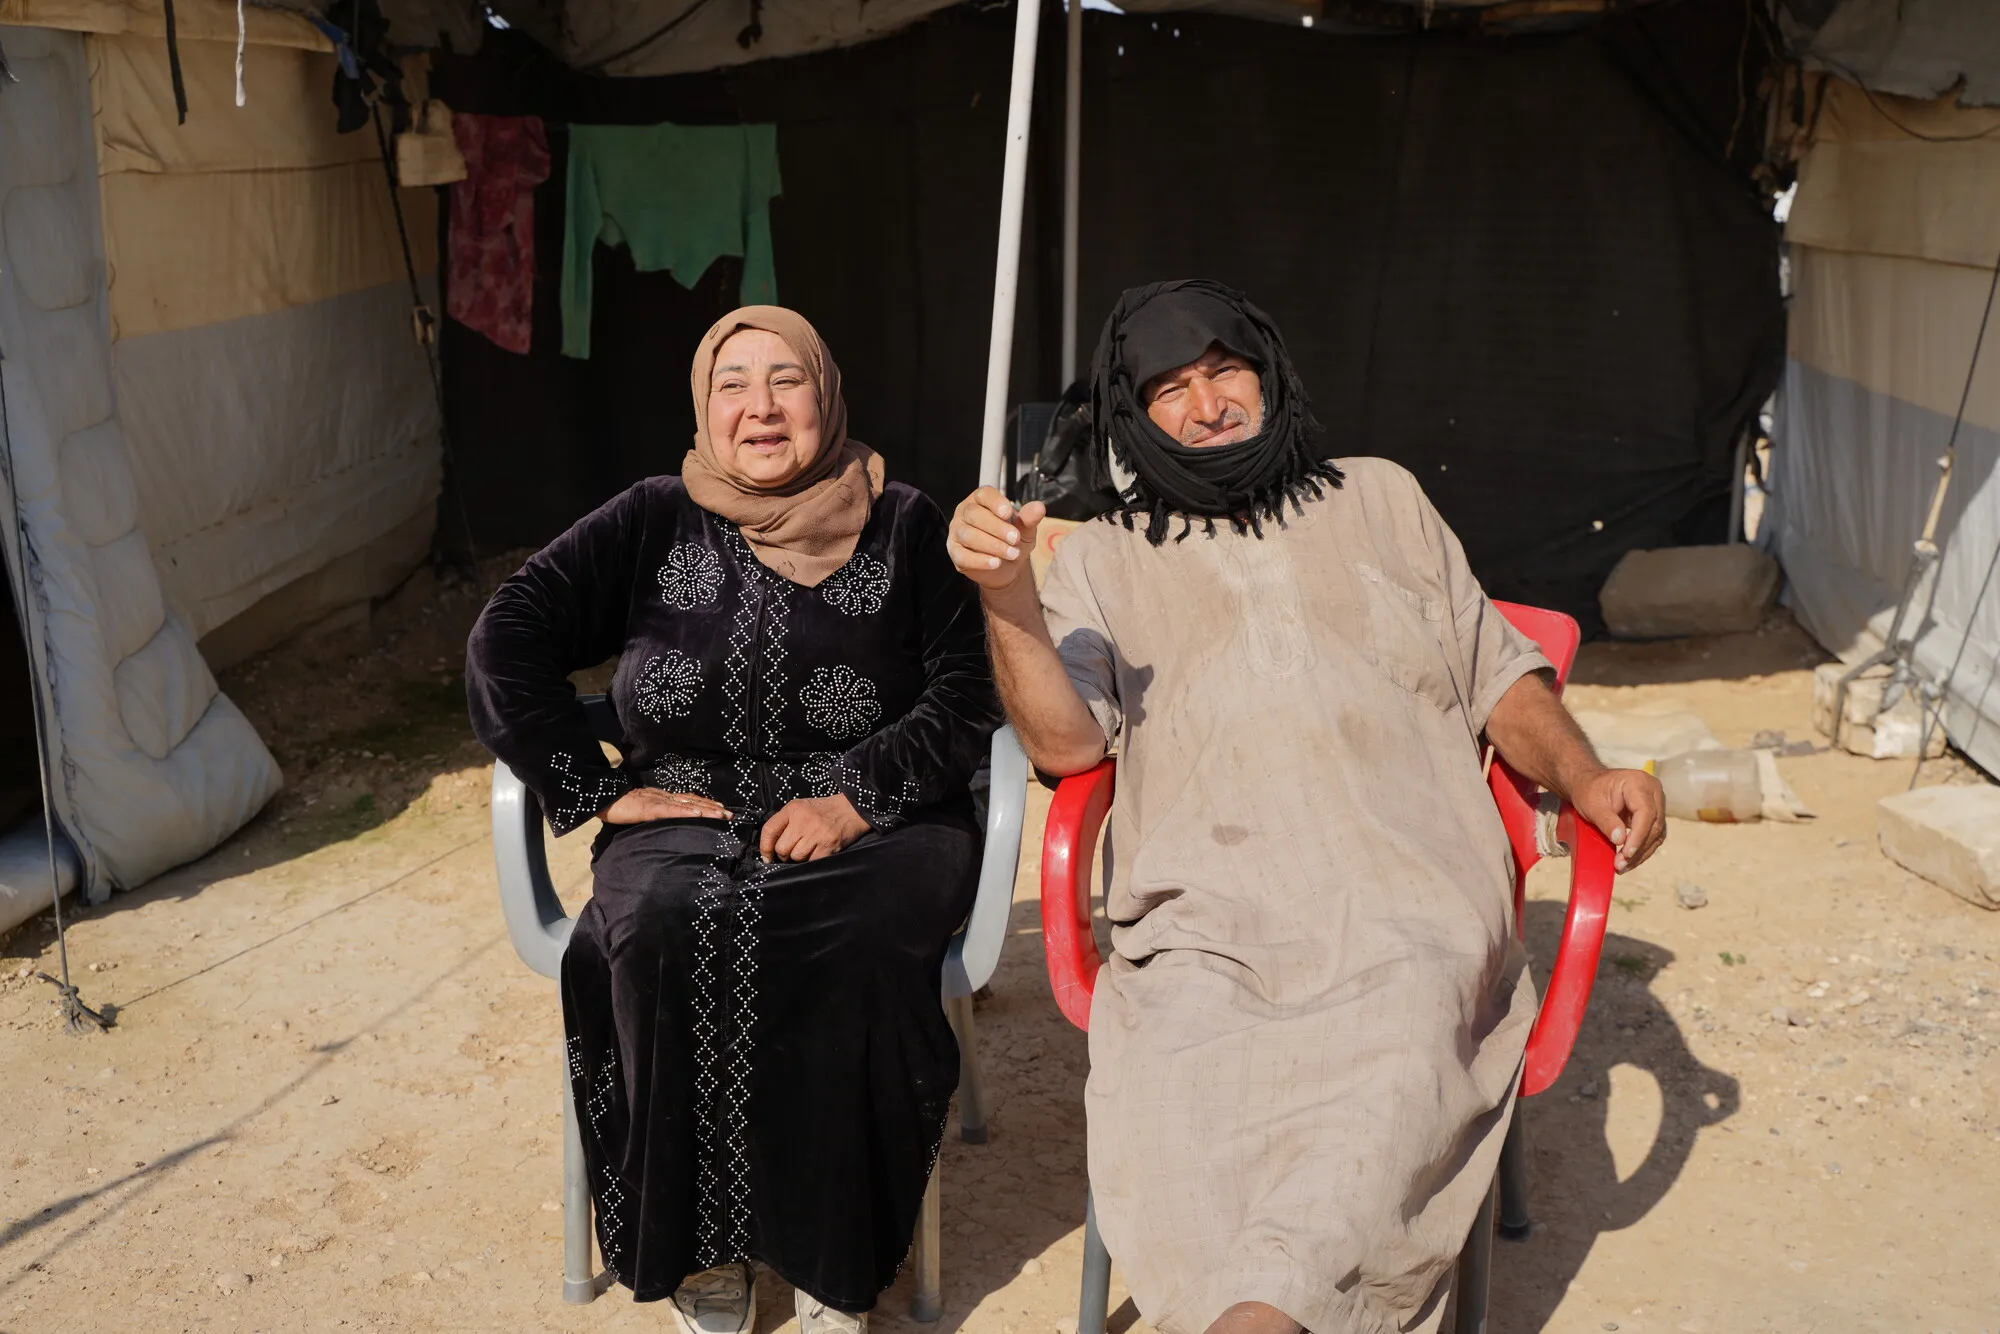 An internally displaced Syrian woman and her husband, sitting next to each other in front of their tent.